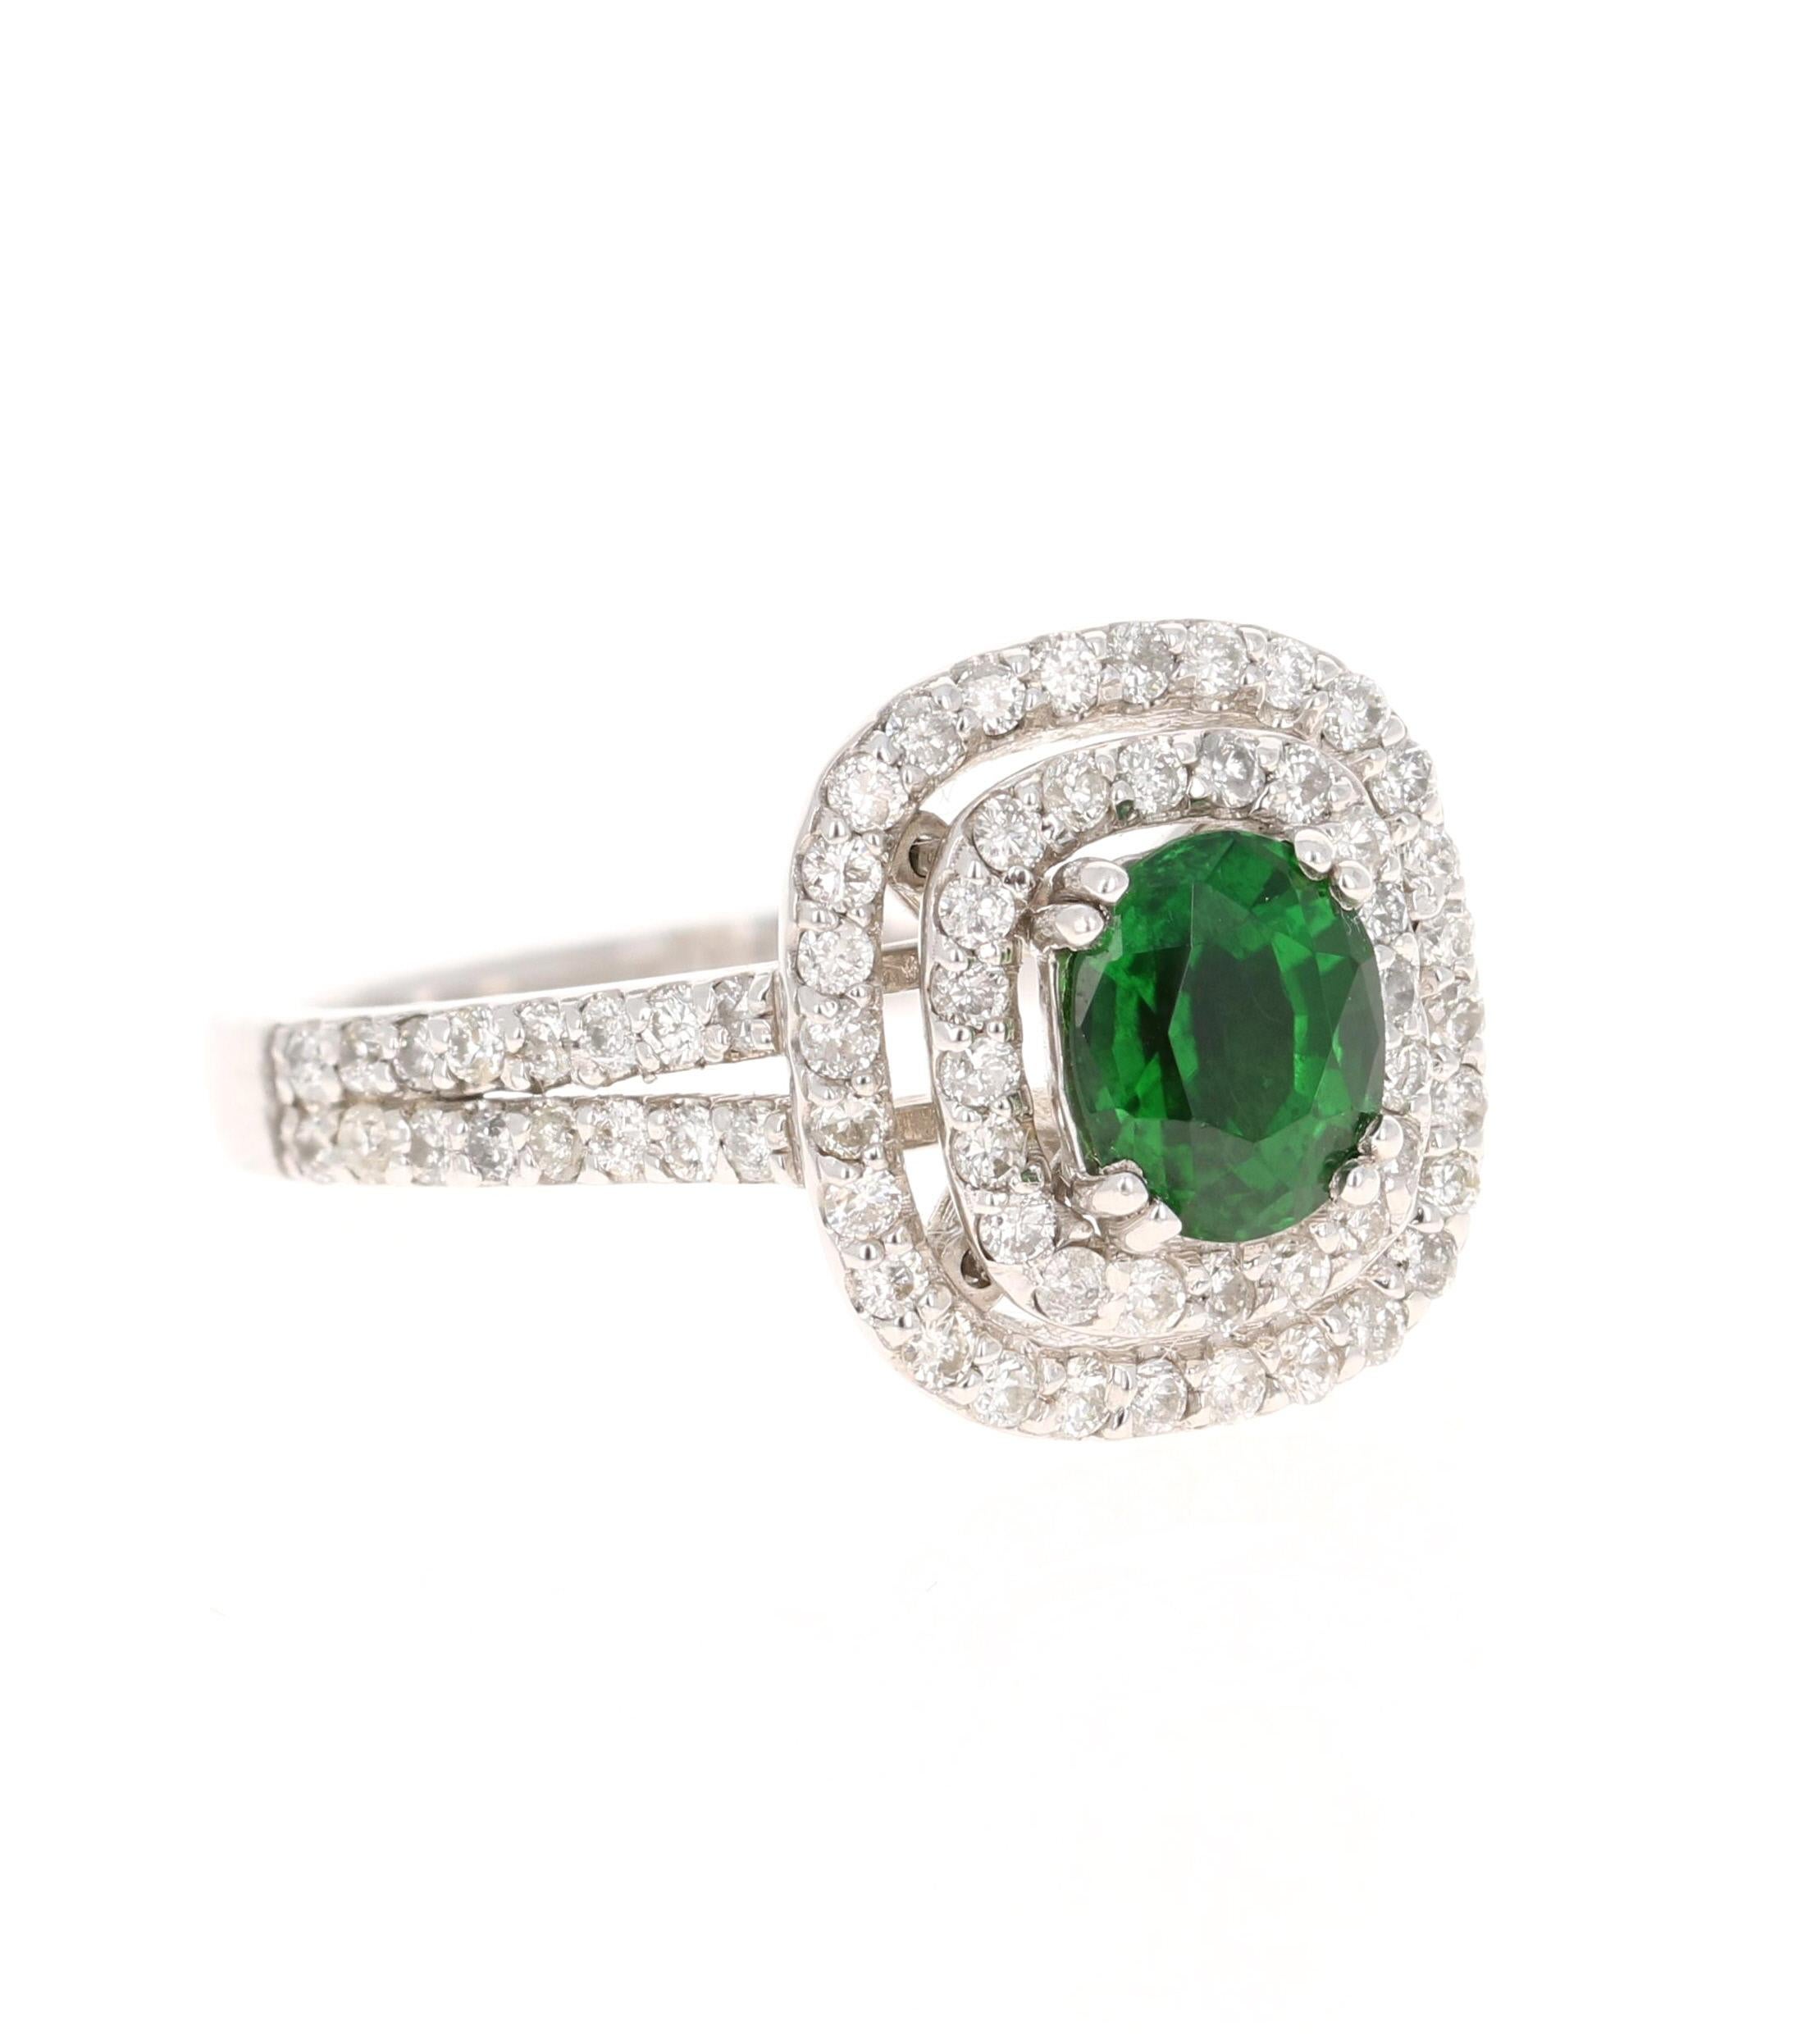 This ring has an Oval Cut Tsavorite which weighs 0.99 carats and is surrounded by a double halo of 81 Round Cut Diamonds that weighs 0.71 carats. The total carat weight of the ring is 1.70 carats. The clarity and color of the diamonds are SI-F.

The